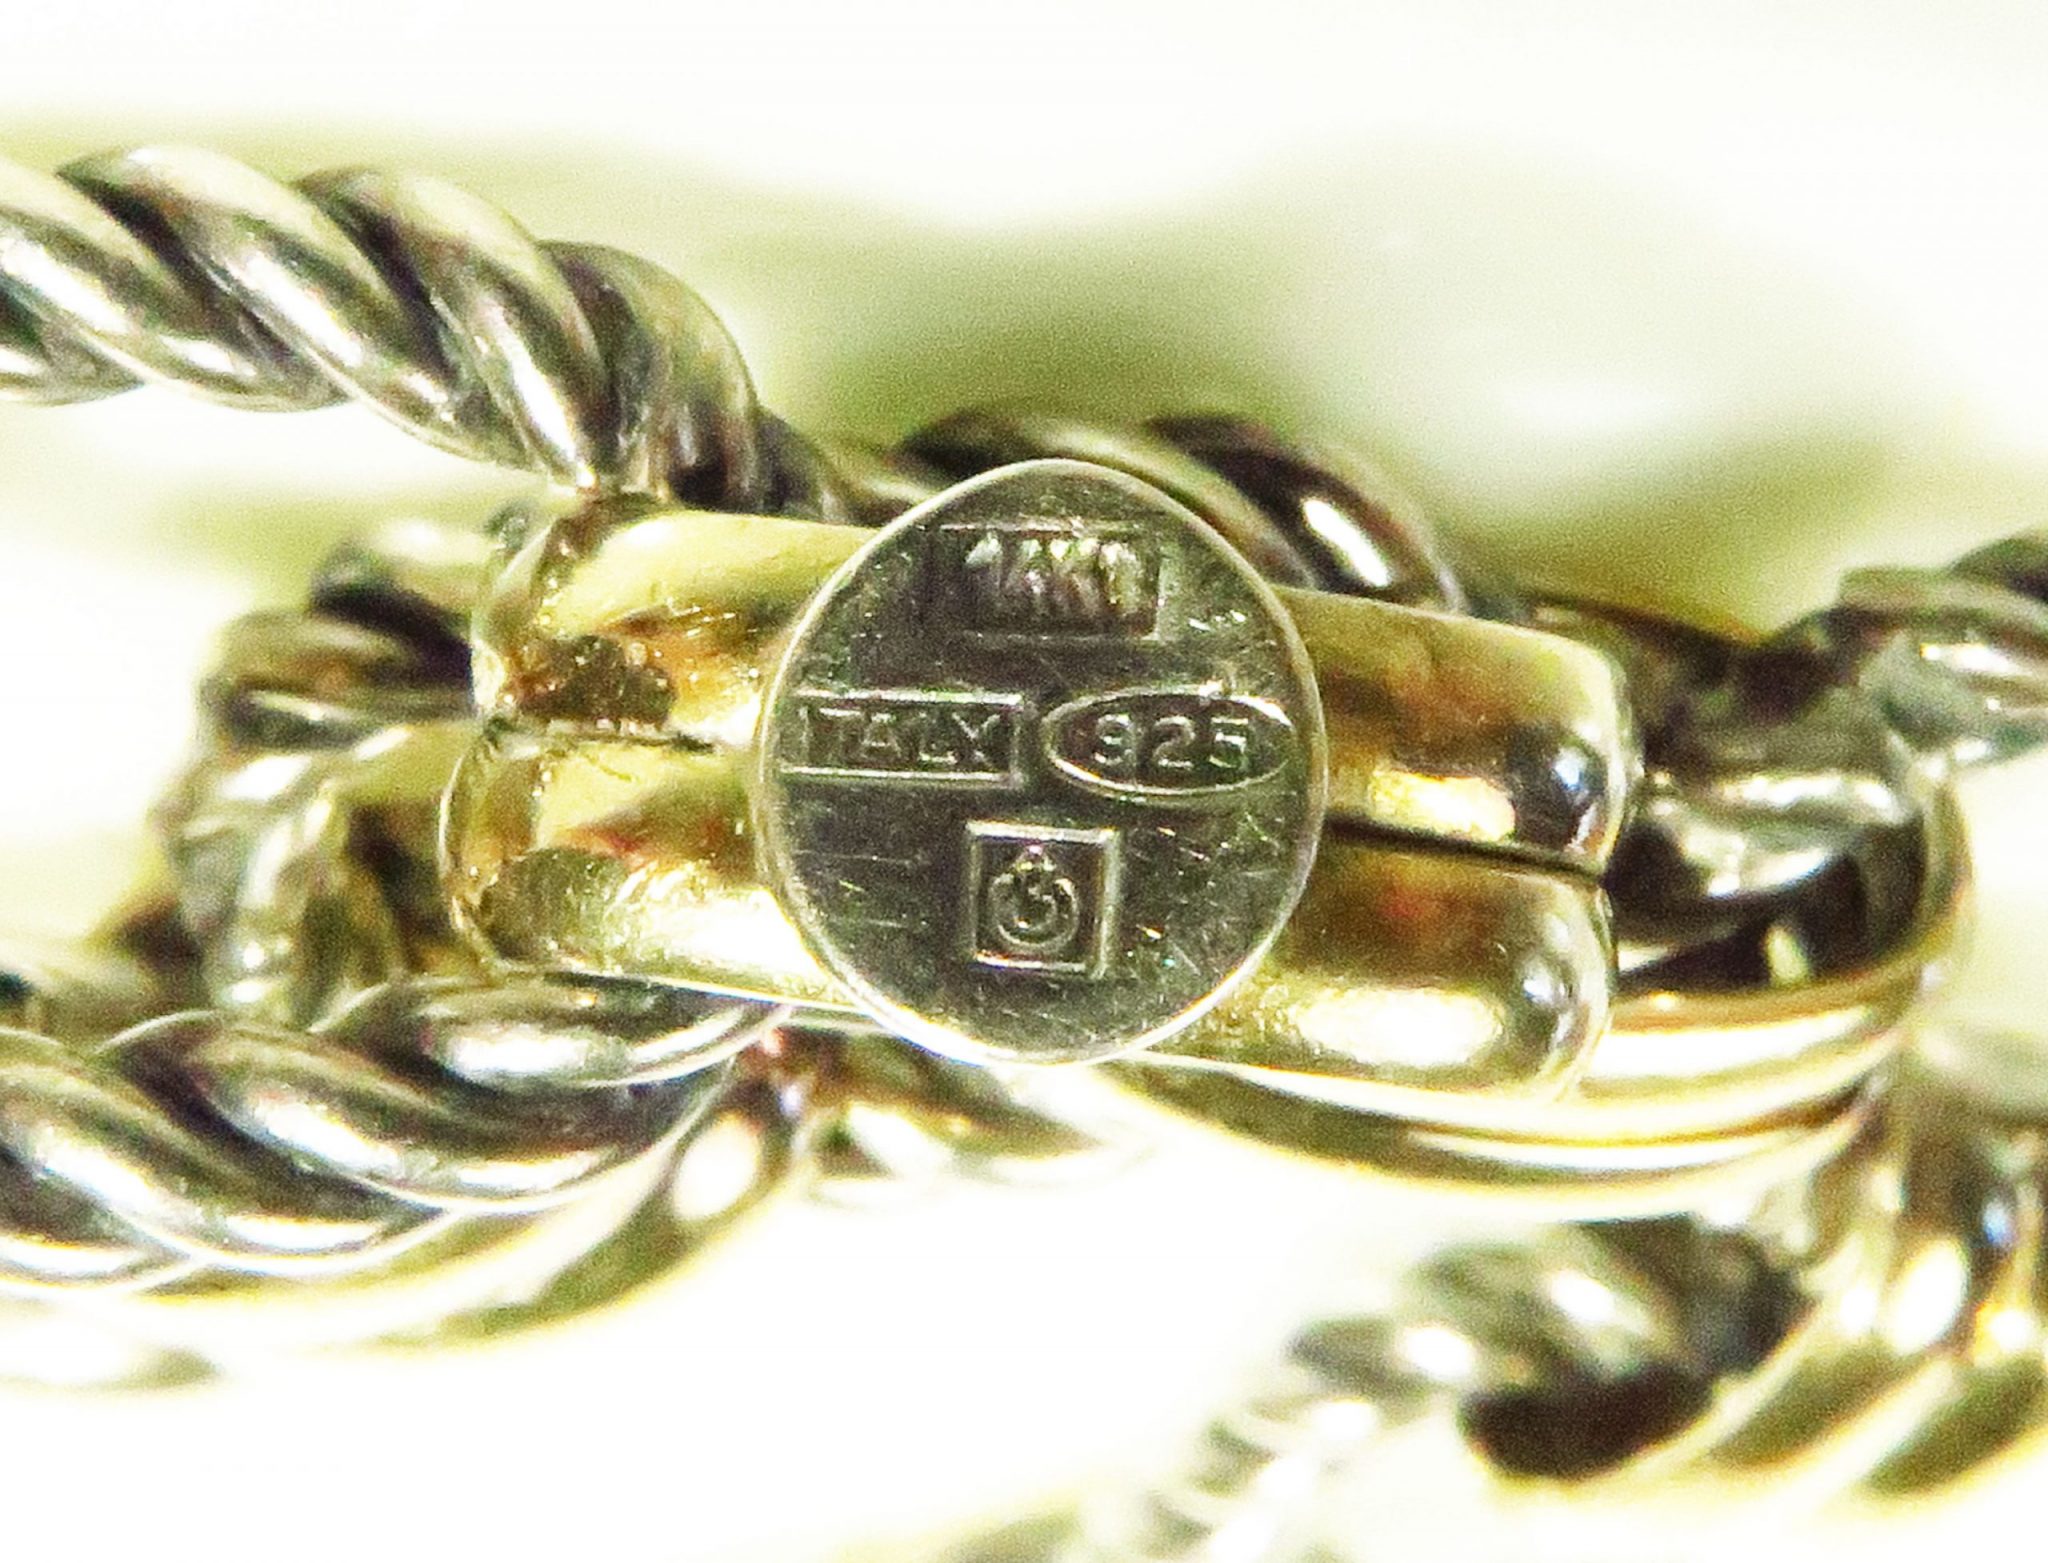 What is a bracelet with “14kt Italy” stamped on it worth? - Quora